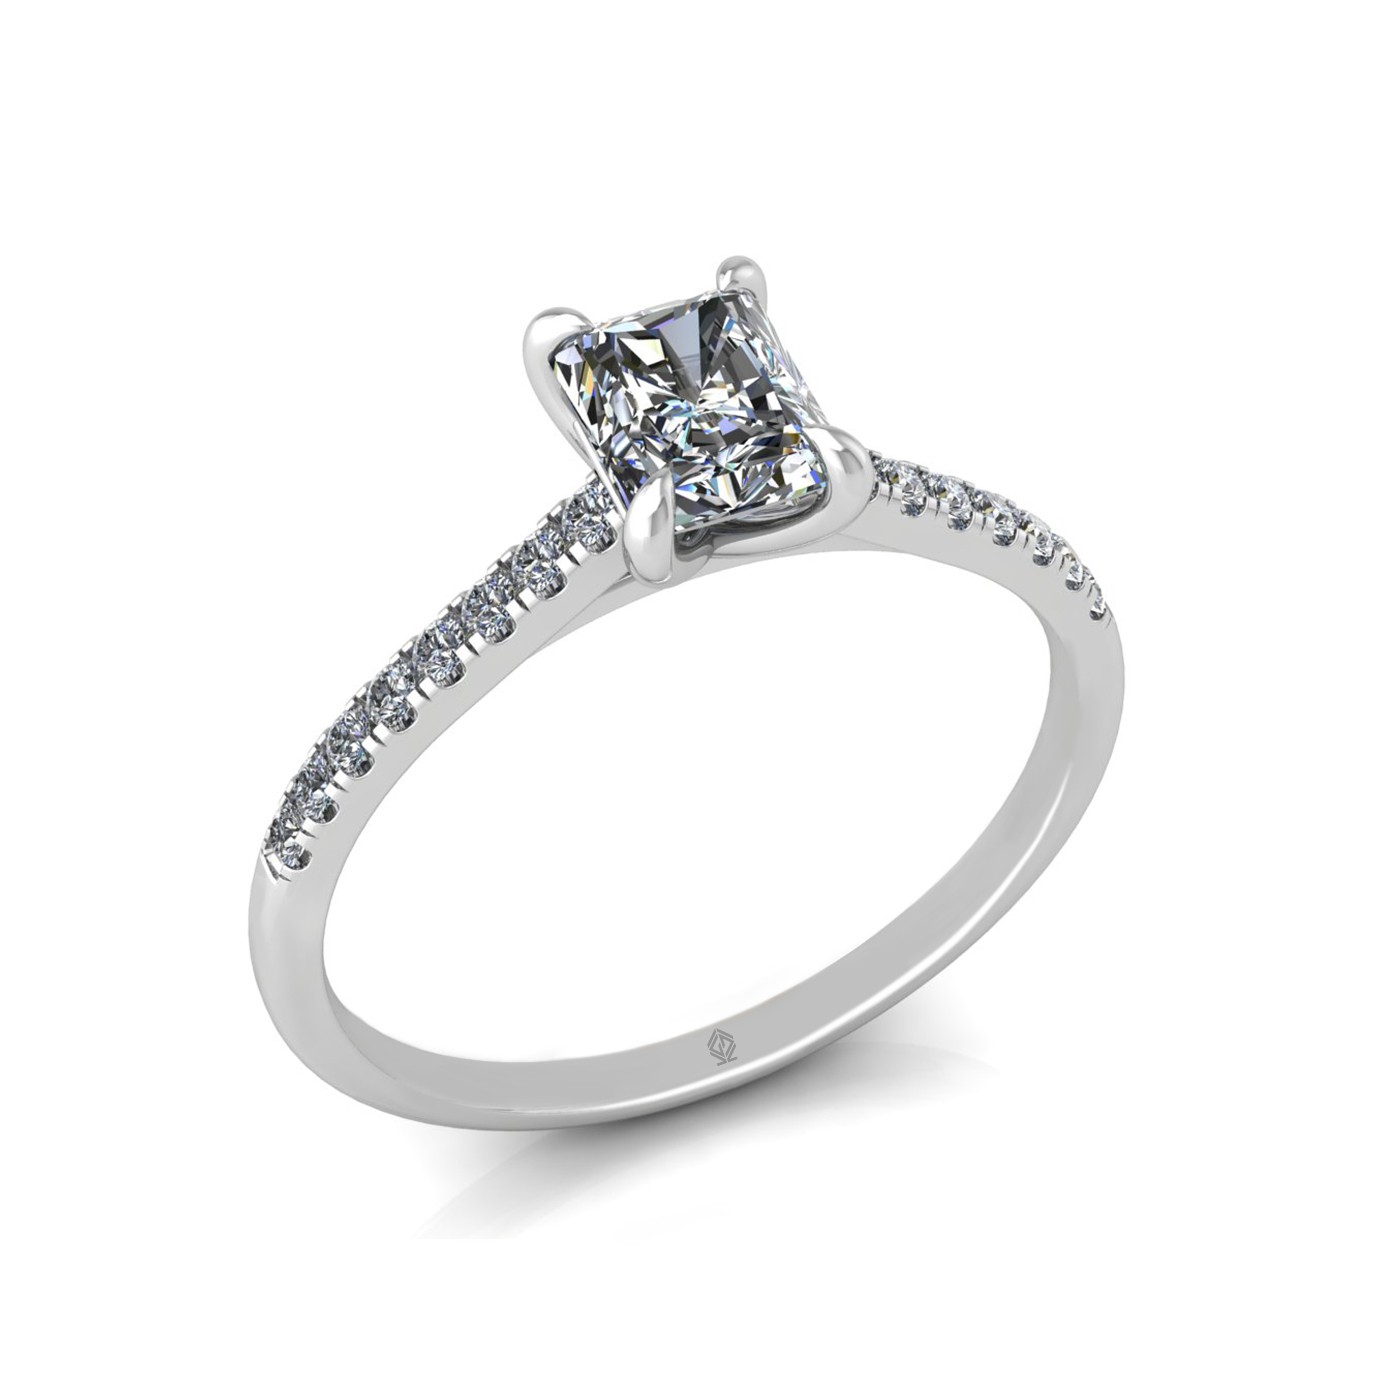 18k white gold  0,80 ct 4 prongs radiant cut diamond engagement ring with whisper thin pavÉ set band